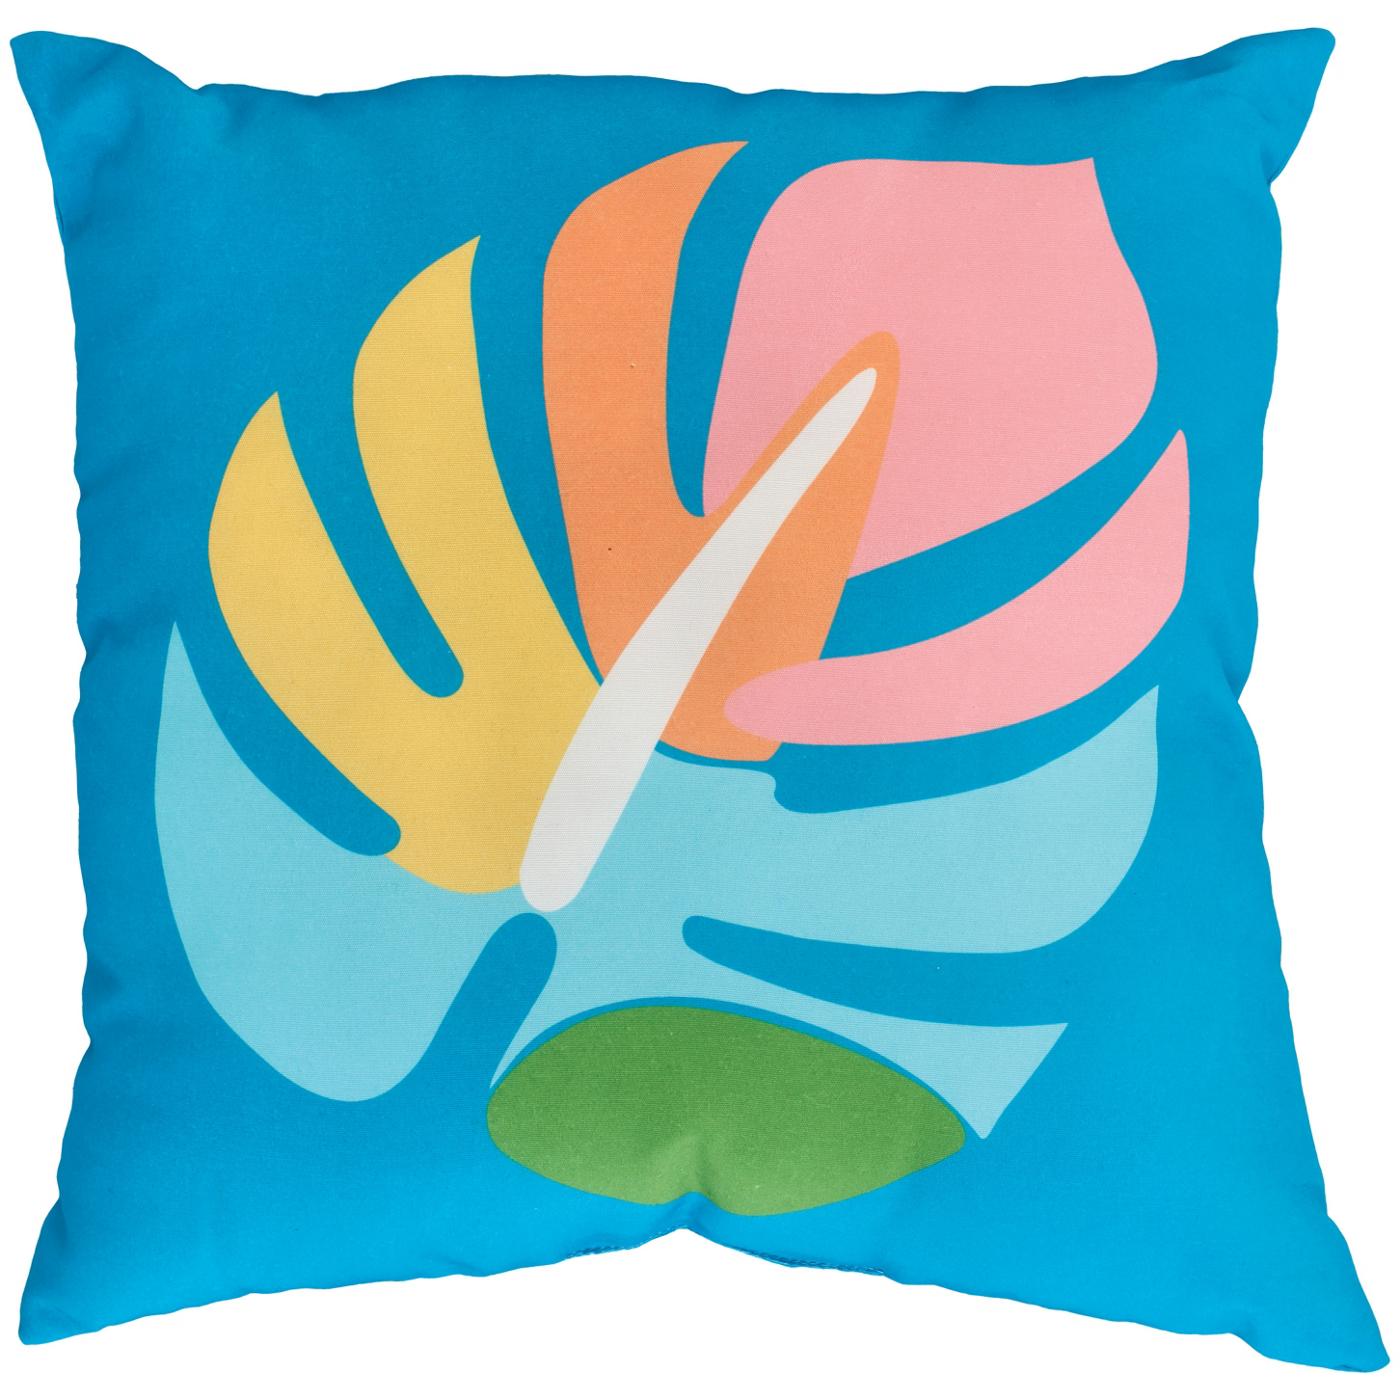 Destination Holiday Monstera Leaf Outdoor Throw Pillow; image 1 of 2